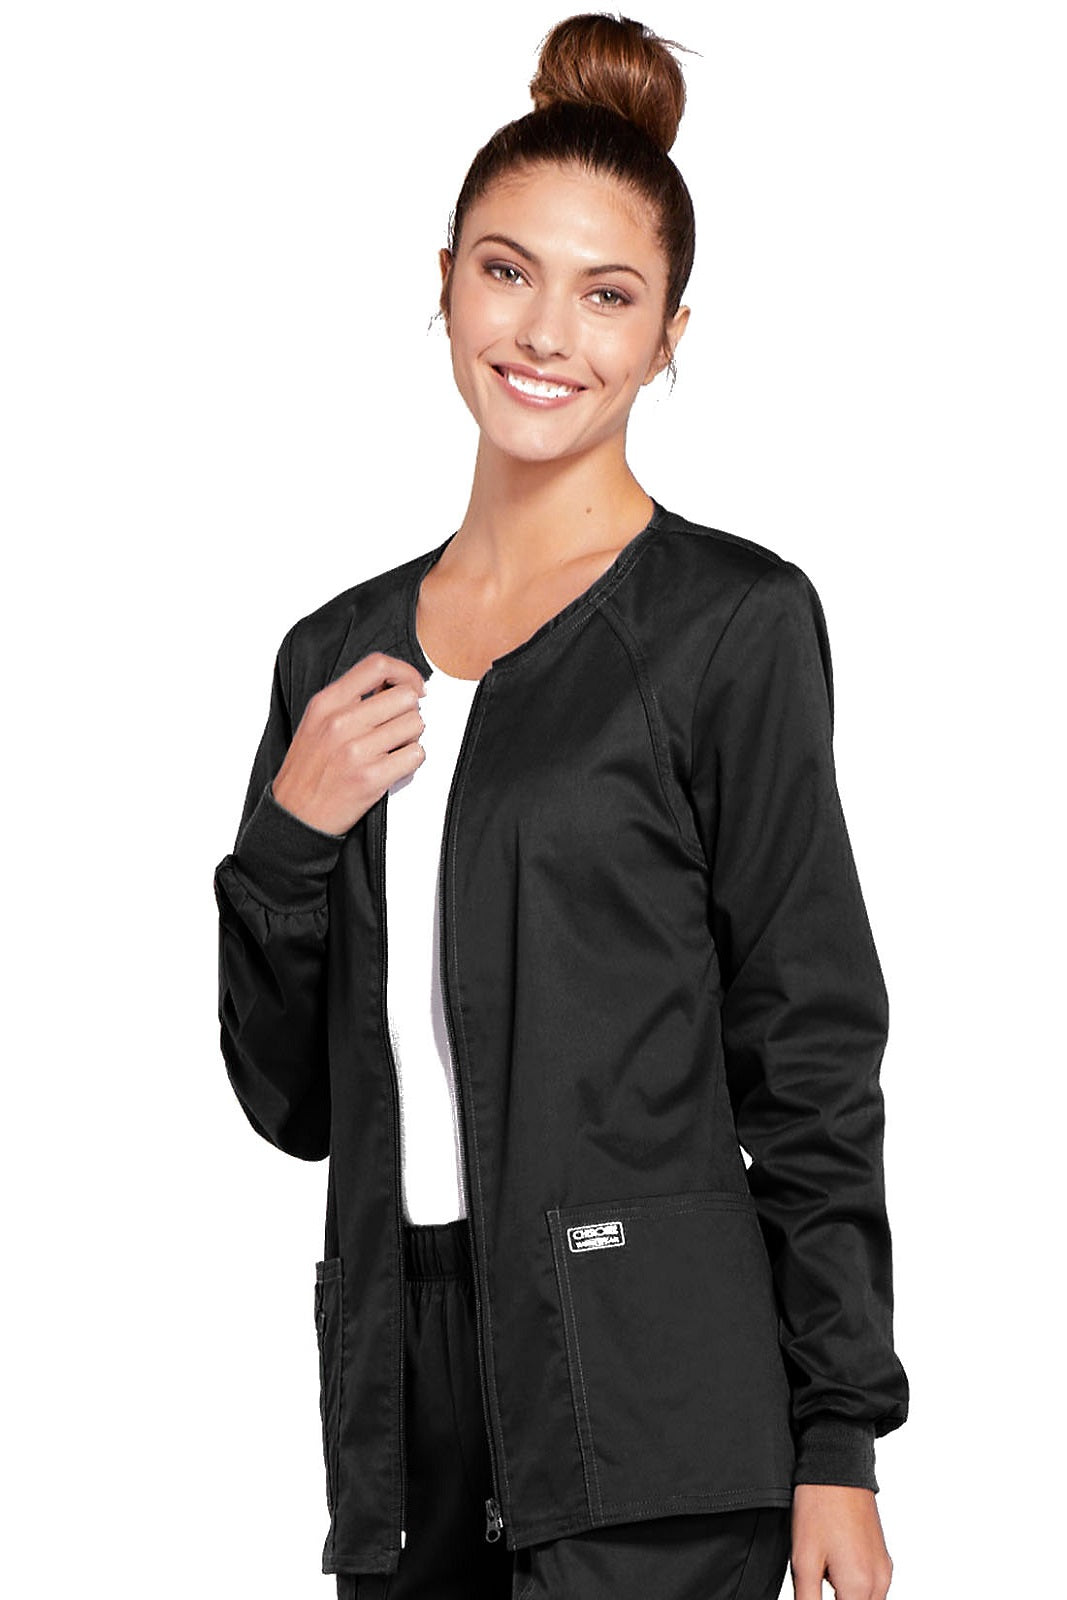 Cherokee Core Stretch Scrub Jacket Zip Front 4315 in Black at Parker's Clothing and Shoes.